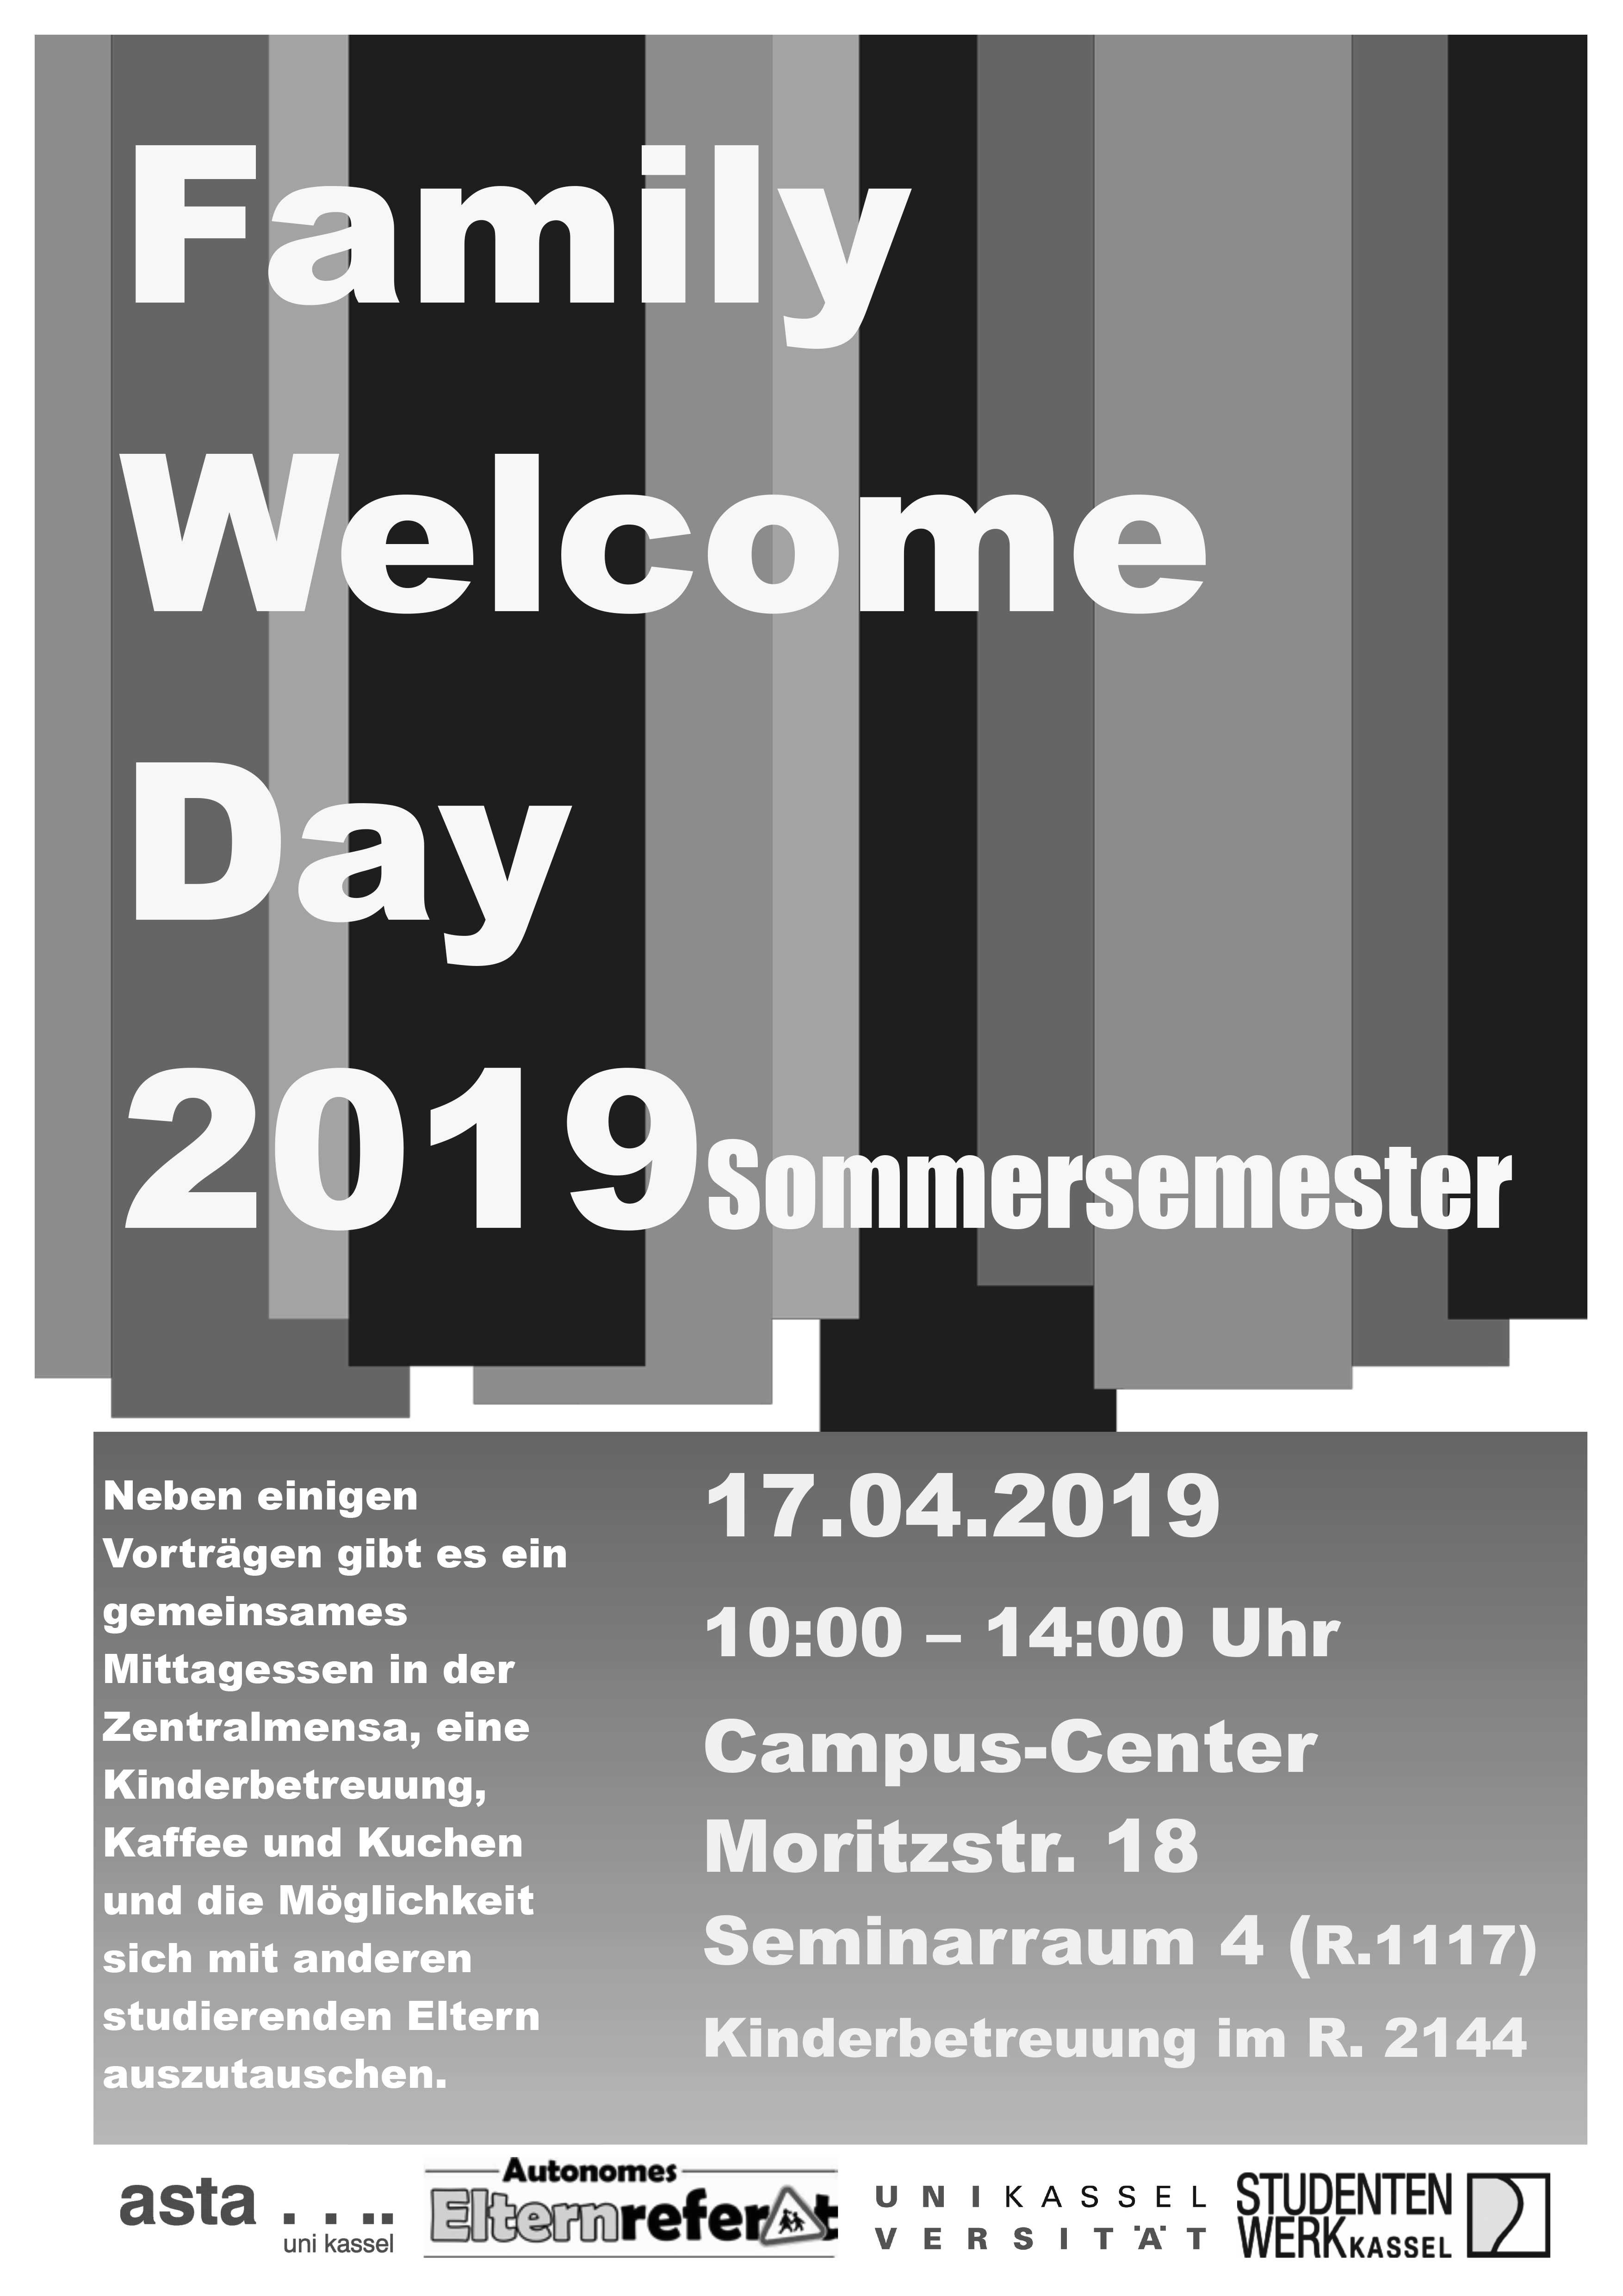 Family Welcome Day 2019